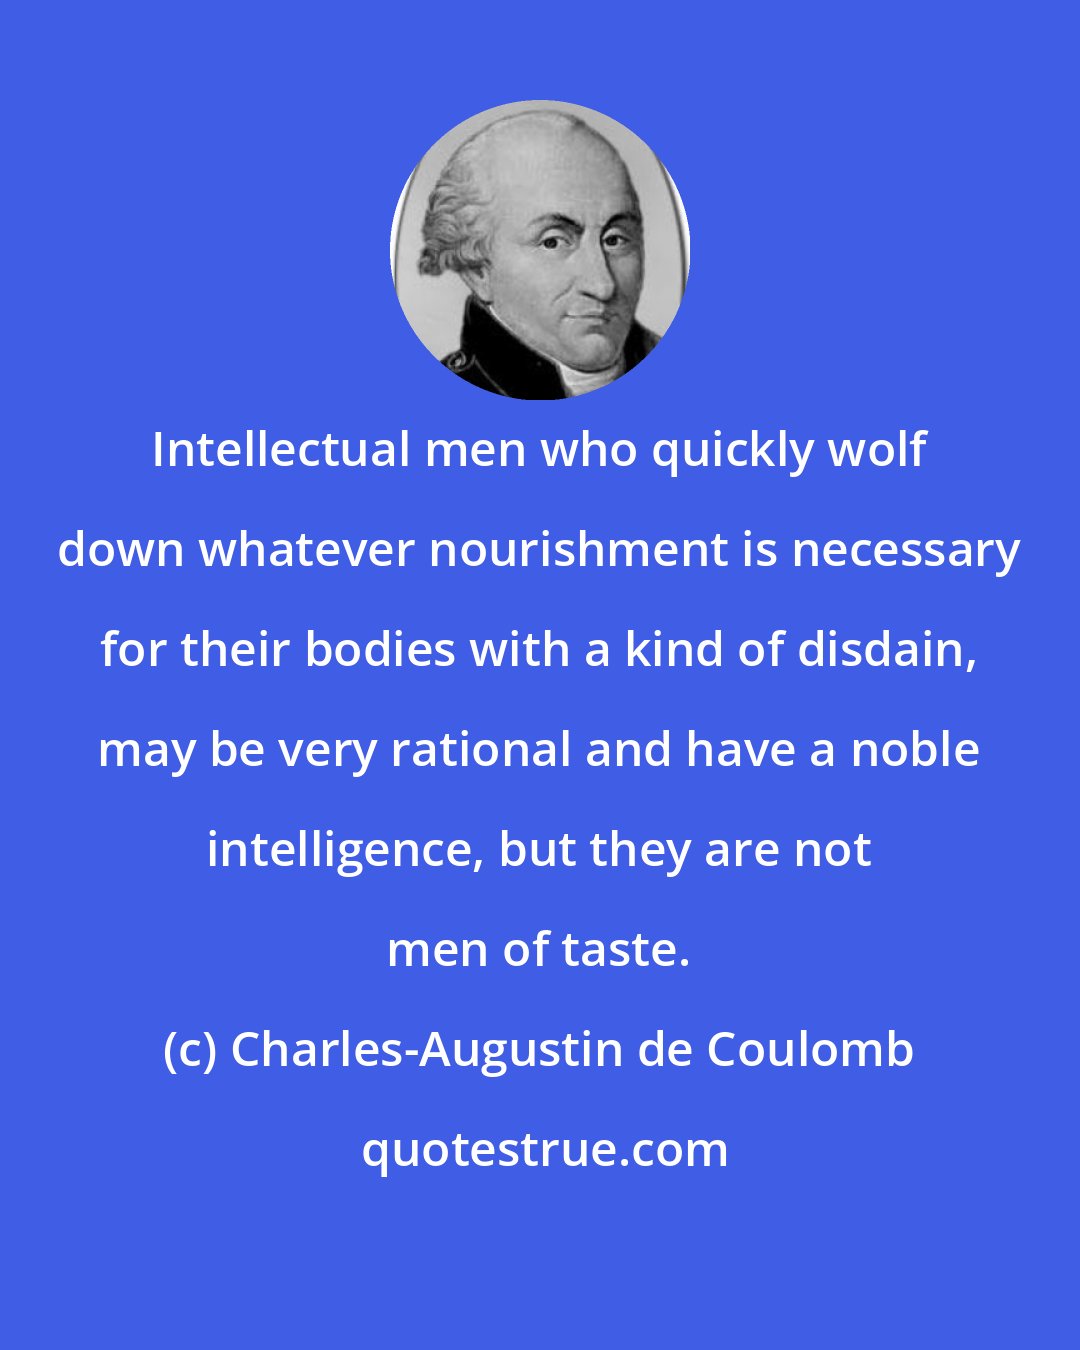 Charles-Augustin de Coulomb: Intellectual men who quickly wolf down whatever nourishment is necessary for their bodies with a kind of disdain, may be very rational and have a noble intelligence, but they are not men of taste.